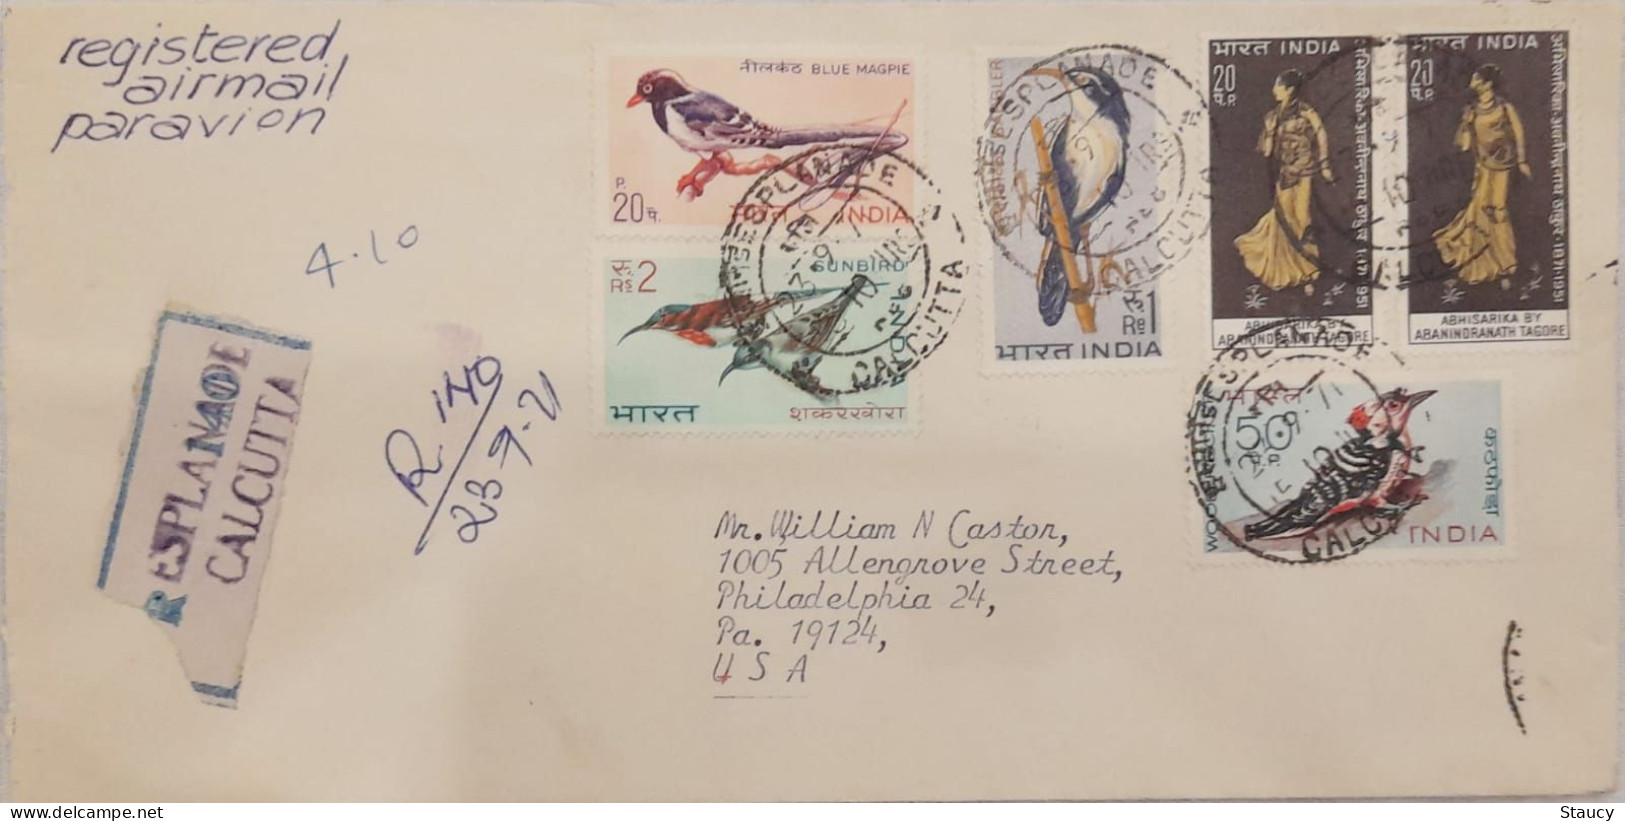 India 1968 BIRDS~Wildlife Preservation - Fauna / Birds Complete Set Of 4 Stamps USED On Registered Cover To USA As Scan - Poste Aérienne